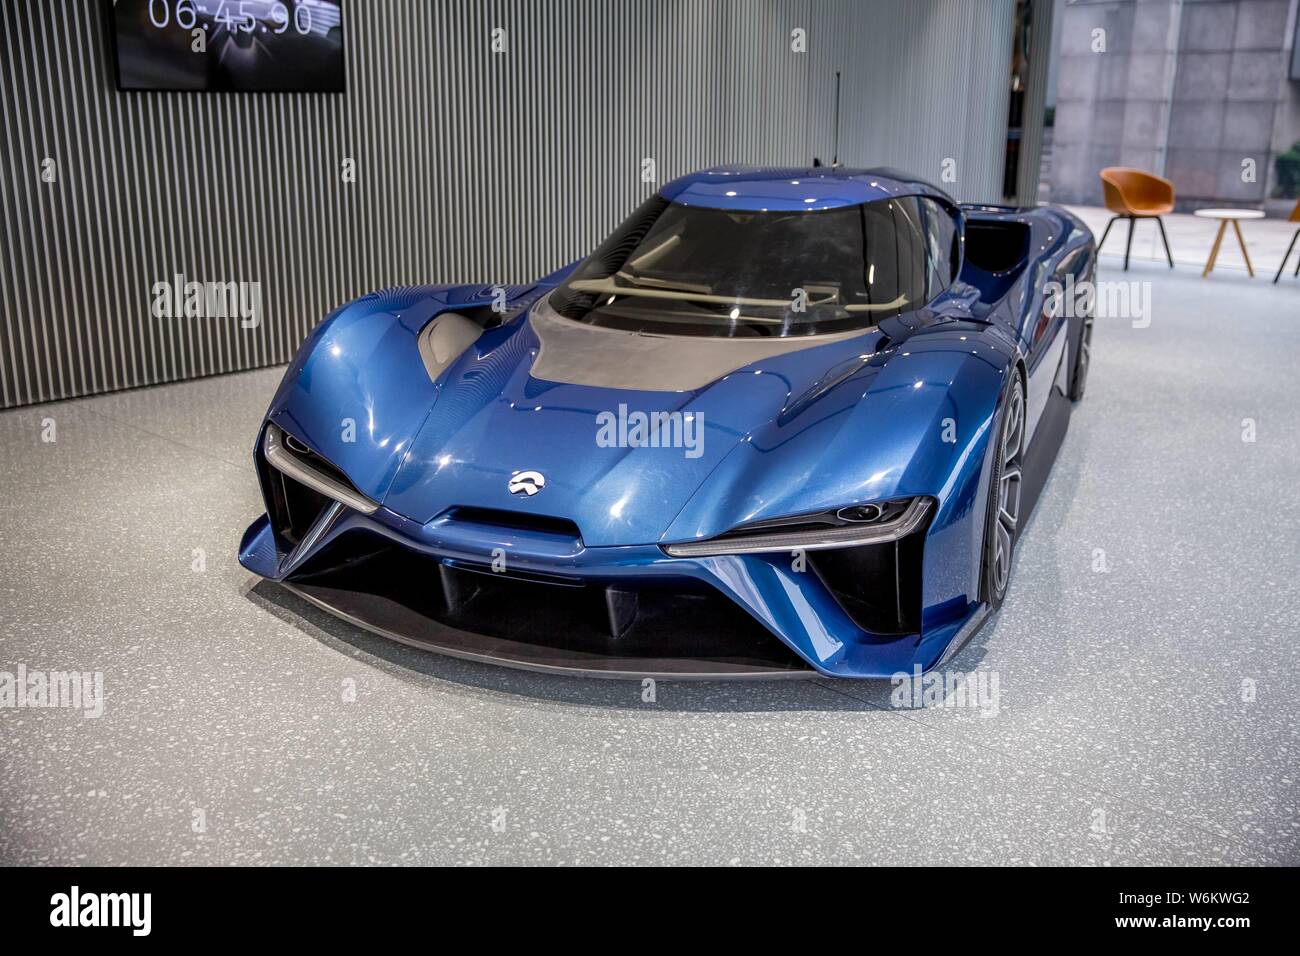 A NIO EP9 NextEV sports car is on display in the fourth Nio's user center, NIO House, in Guangzhou city, south China's Guangdong province, 23 January Stock Photo